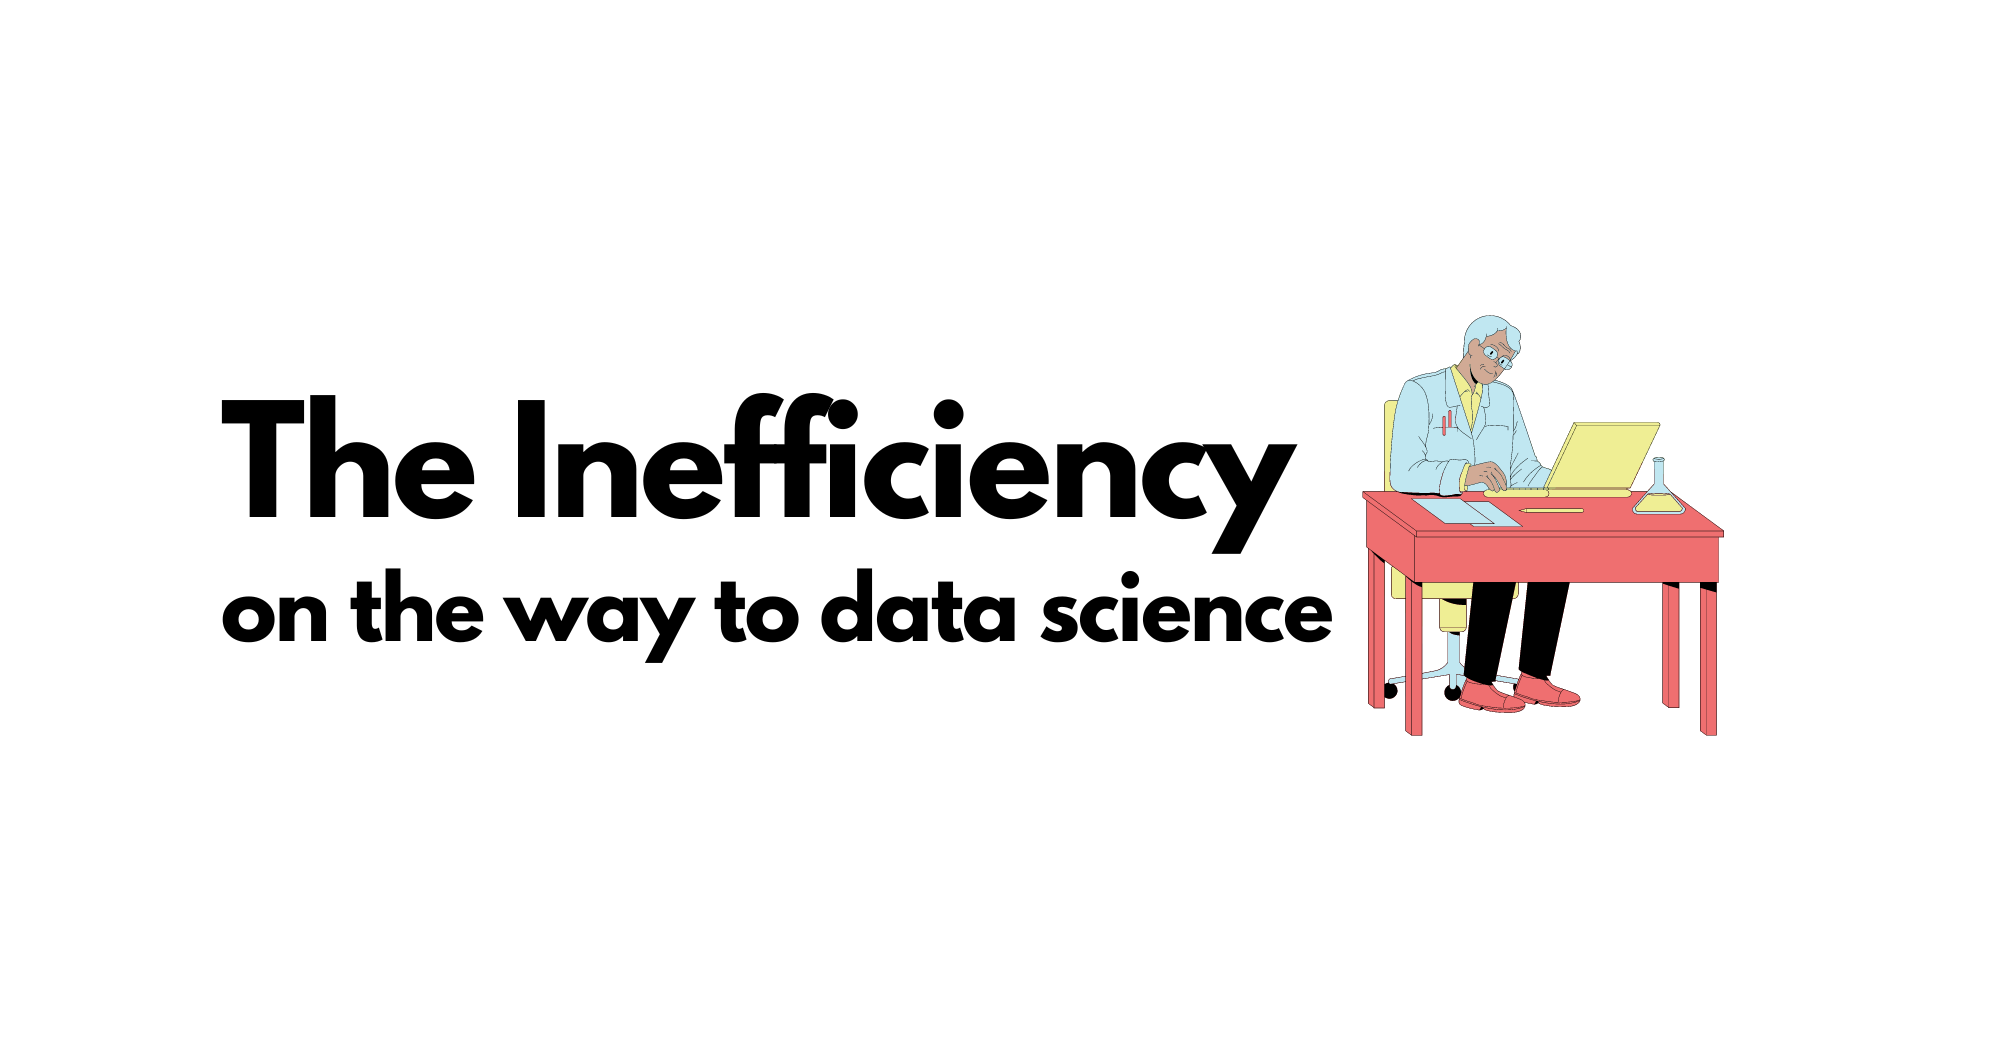 The inefficiency on the way to data science